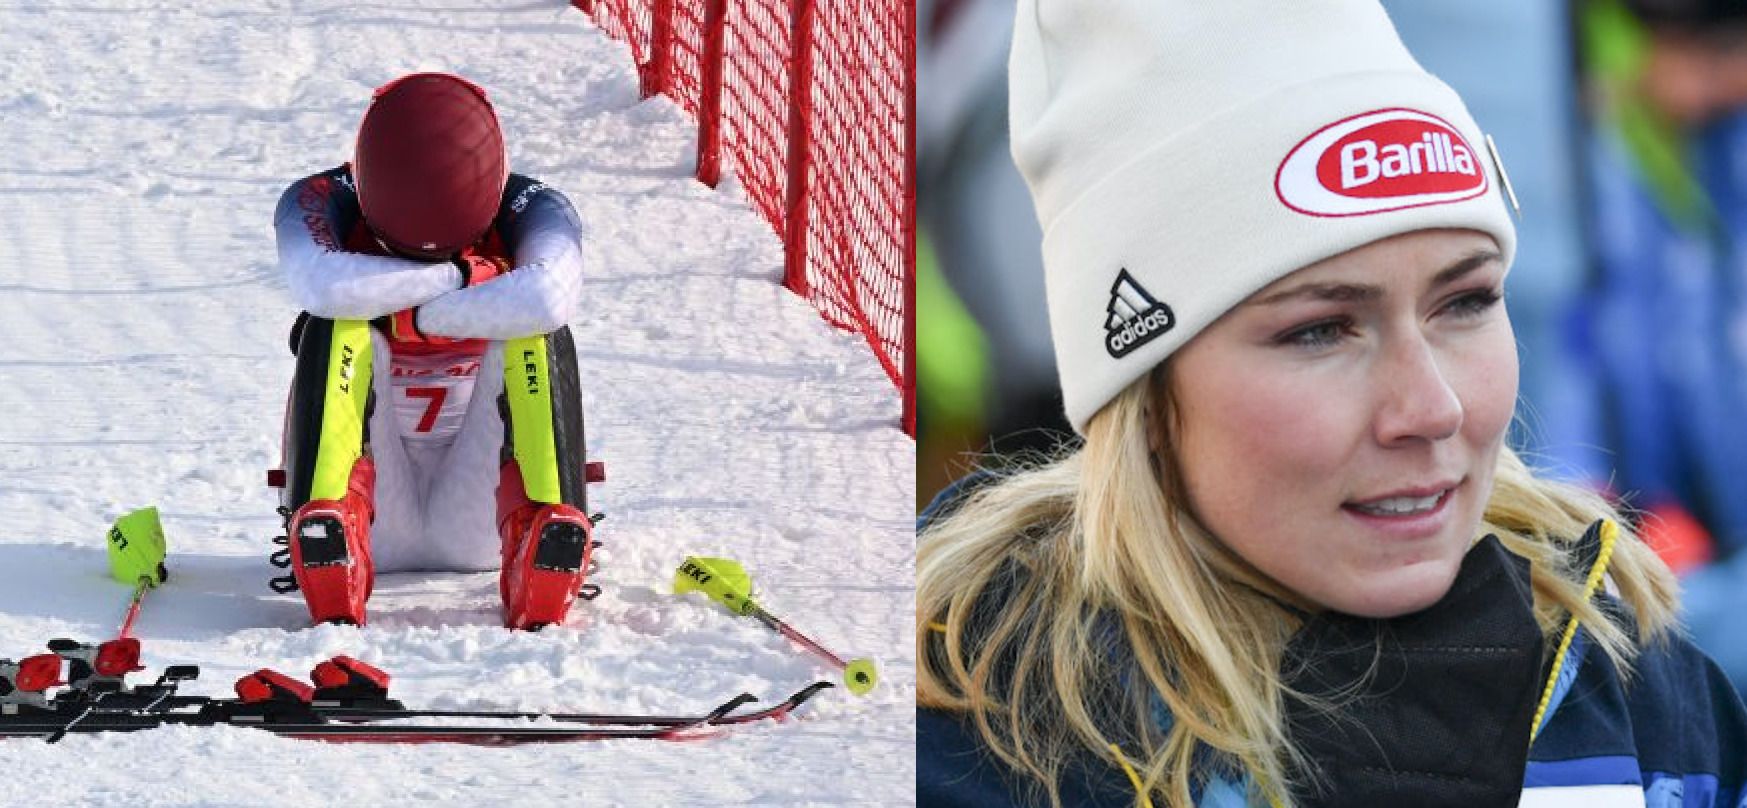 Winter Olympic Fans Rally Around Mikaela Shiffrin After Her Heartbreaking Slalom Race